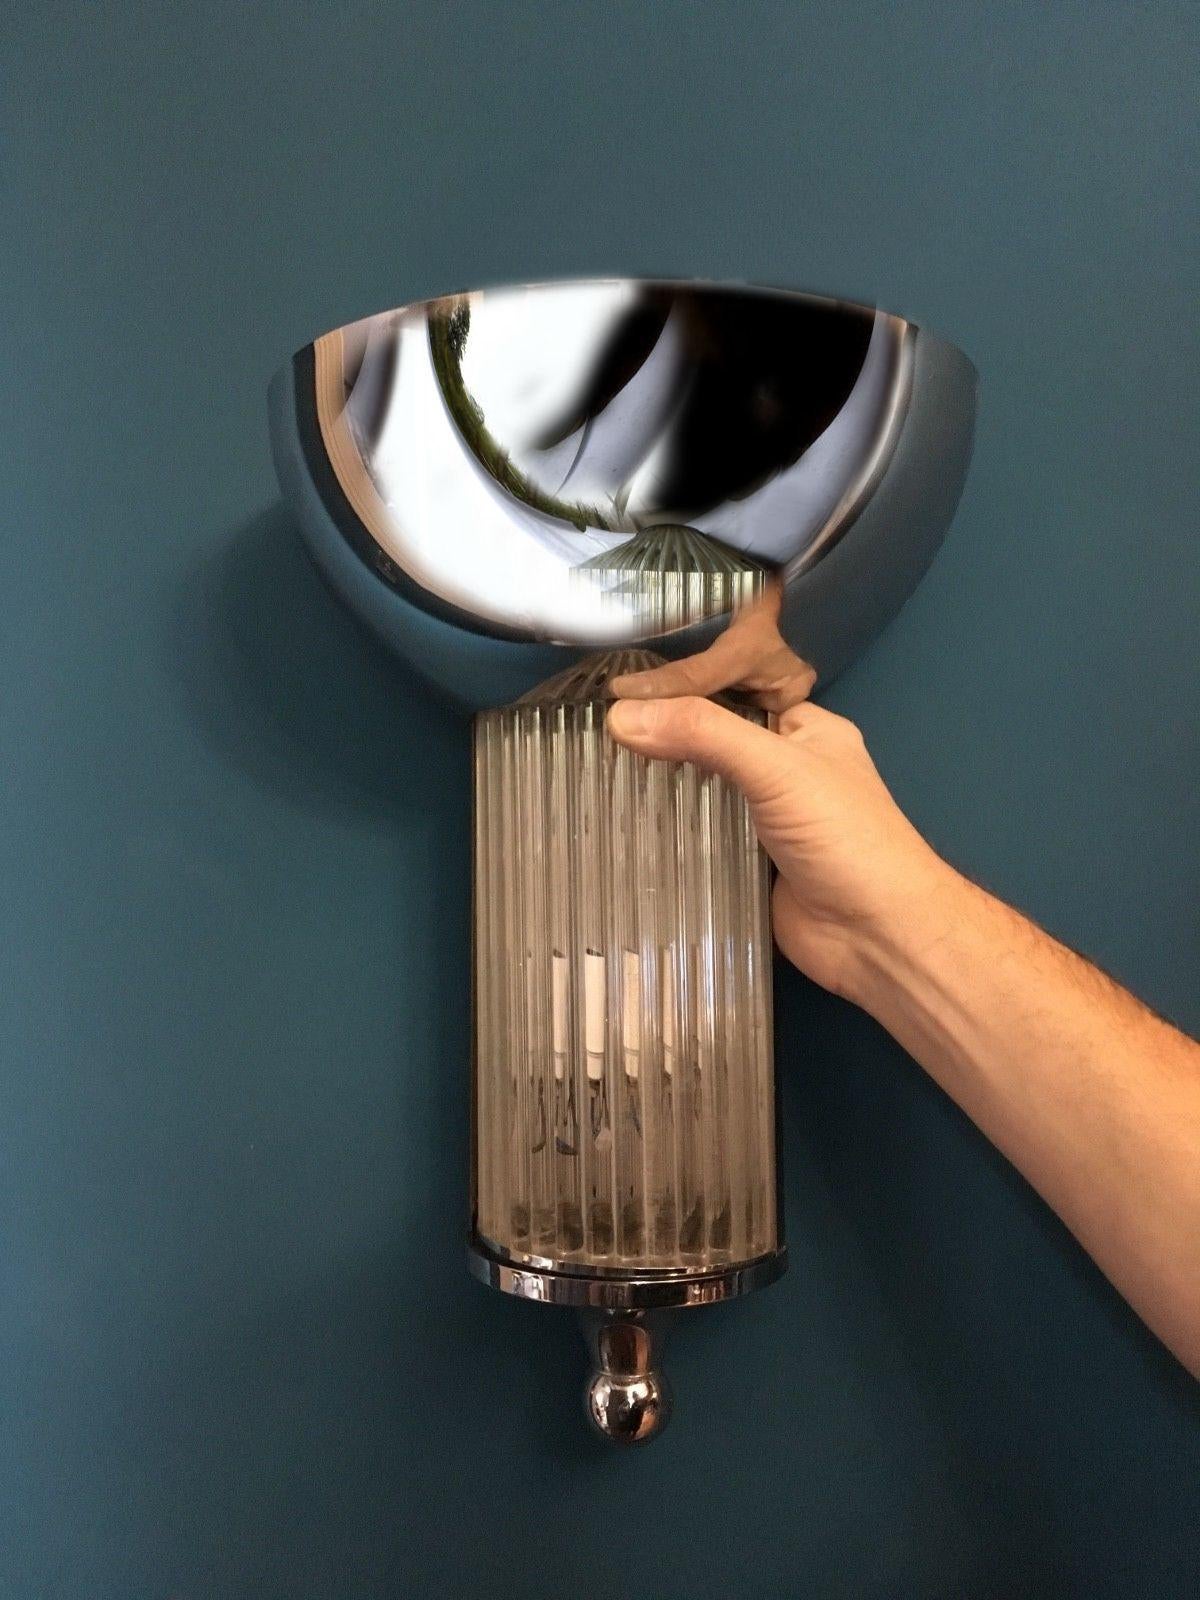 Lovely pair of large Cinema style Art Deco chrome and glass rods wall lights. Excellent used condition, each light takes two bulbs with a light behind glass rods and in chrome up-lighter shade. Wonderful ambient lighting makes these lights a real